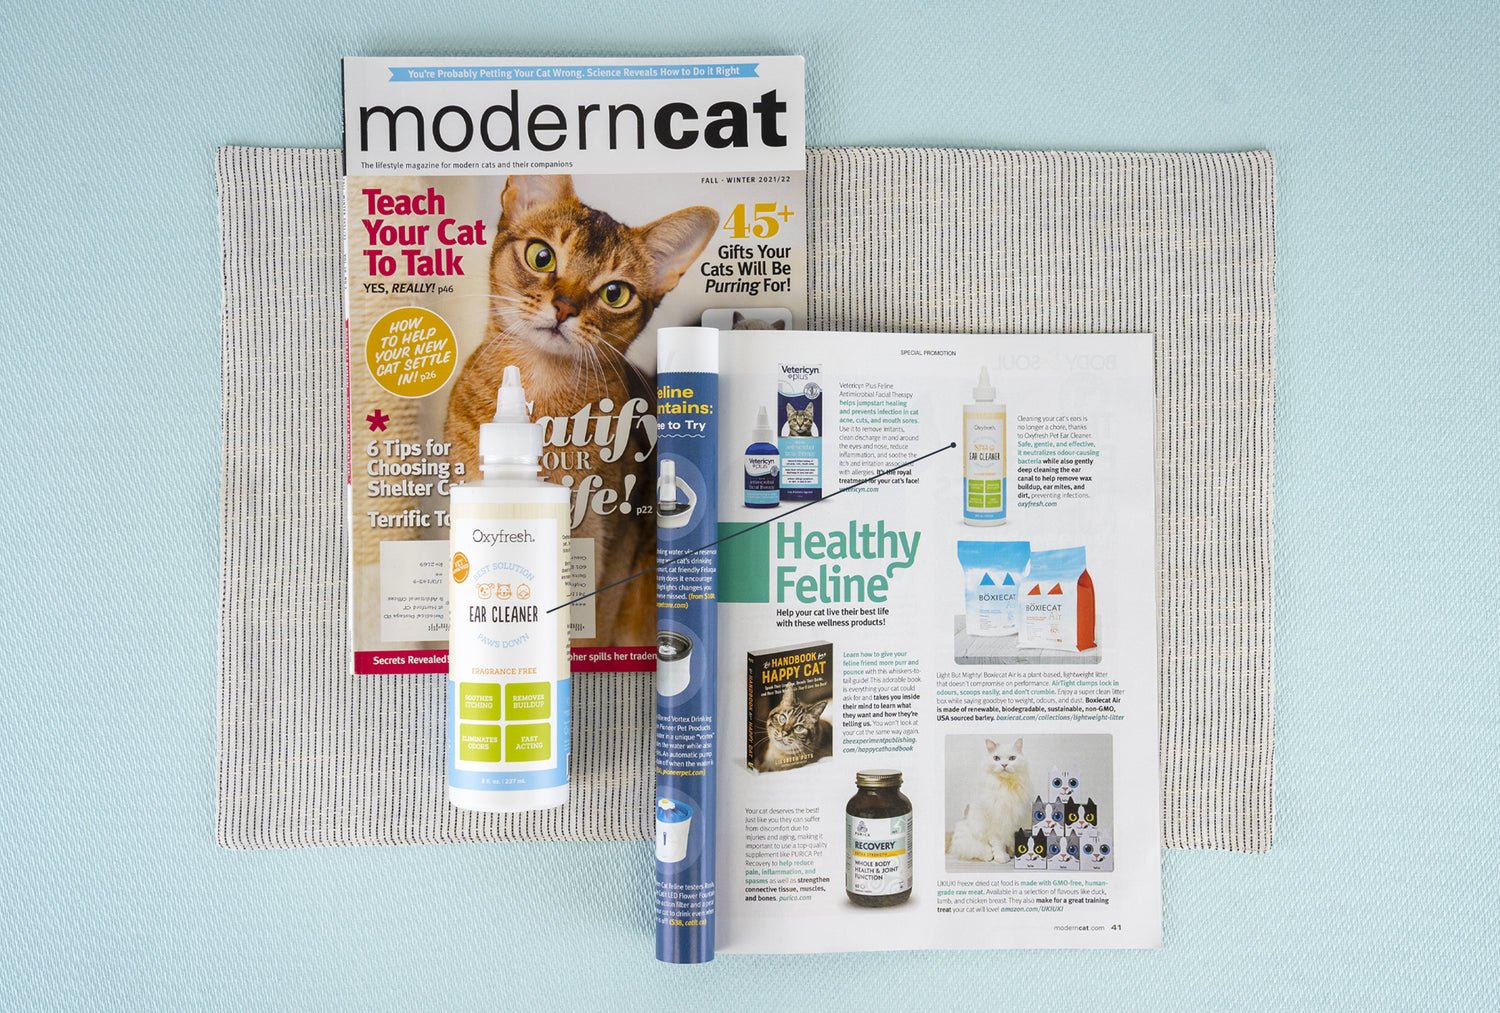 oxyfresh pet ear cleaner next to article in Modern Cat magazine